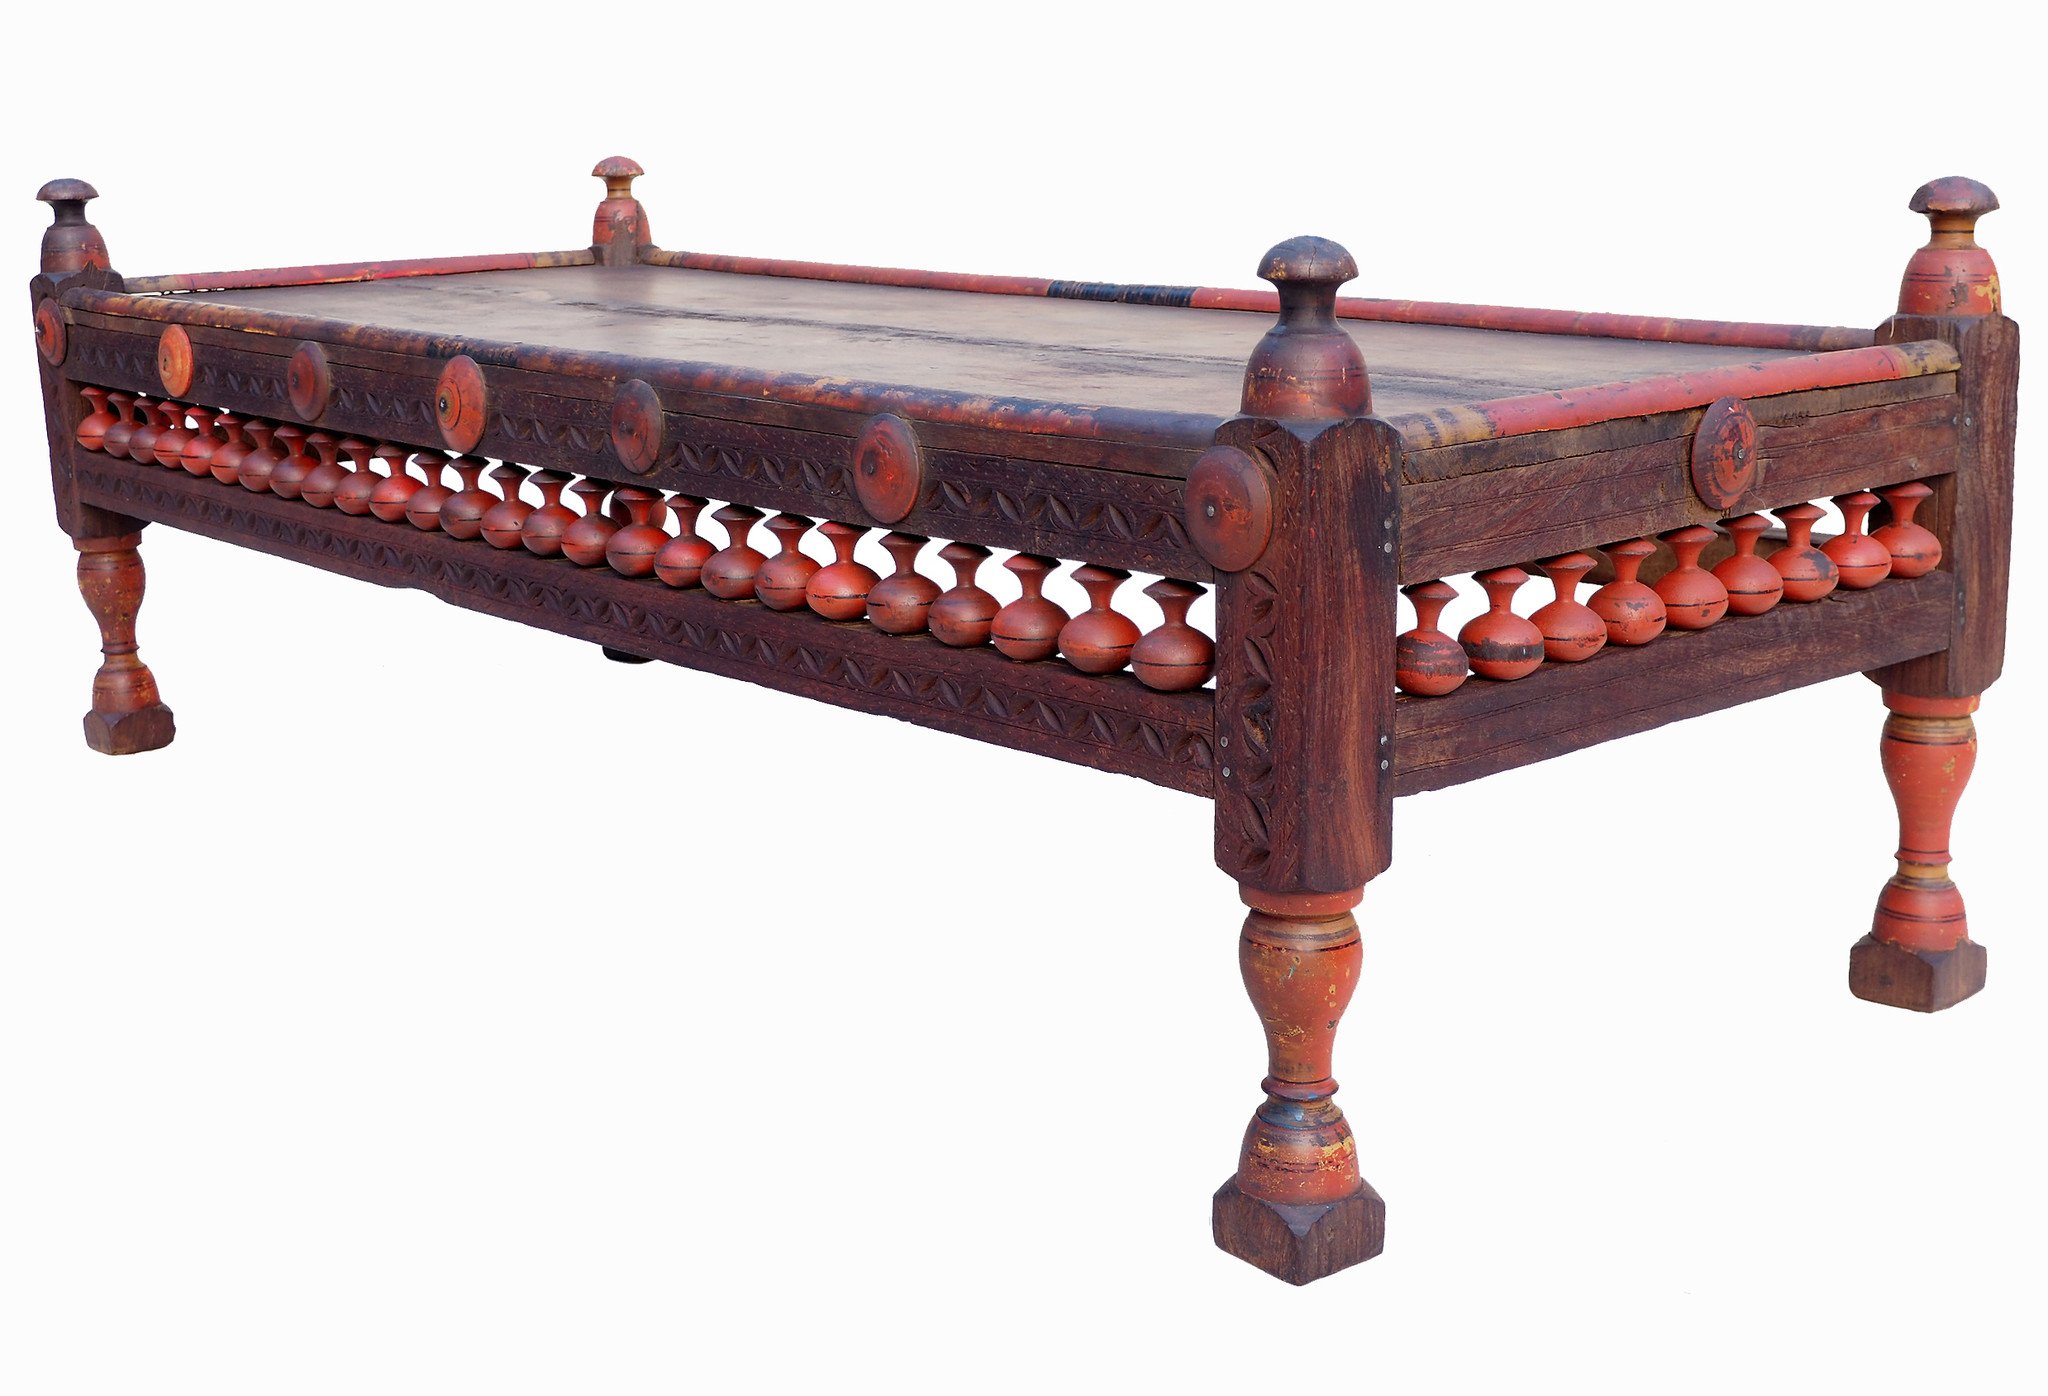 153x60 cm rare Antique solid wood orient tea table sidtable coffee table living roomtable from  Pakistan WL/PJ/E